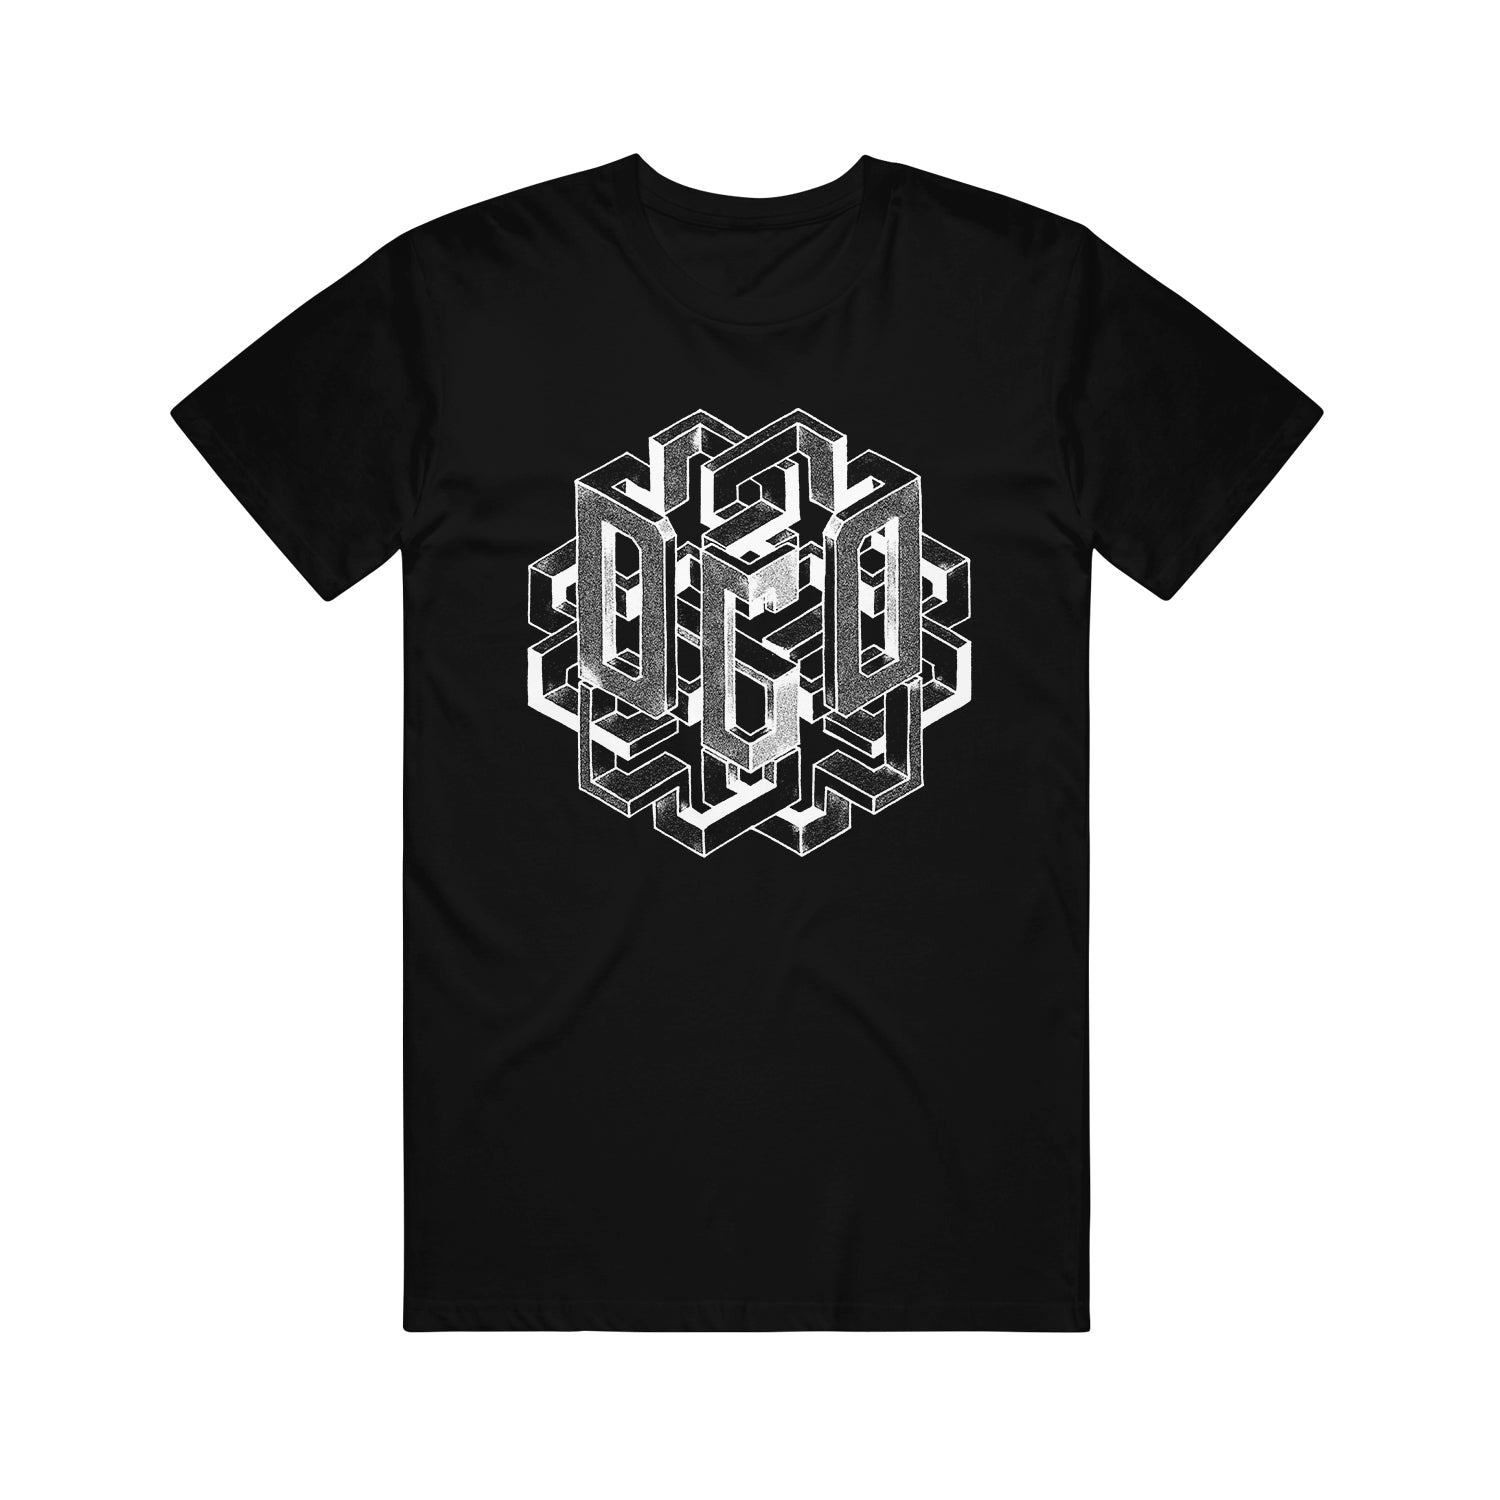 image of a black tee shirt on a white background. tee has a full center chest print in white of geometric boxes with the letters D G D 